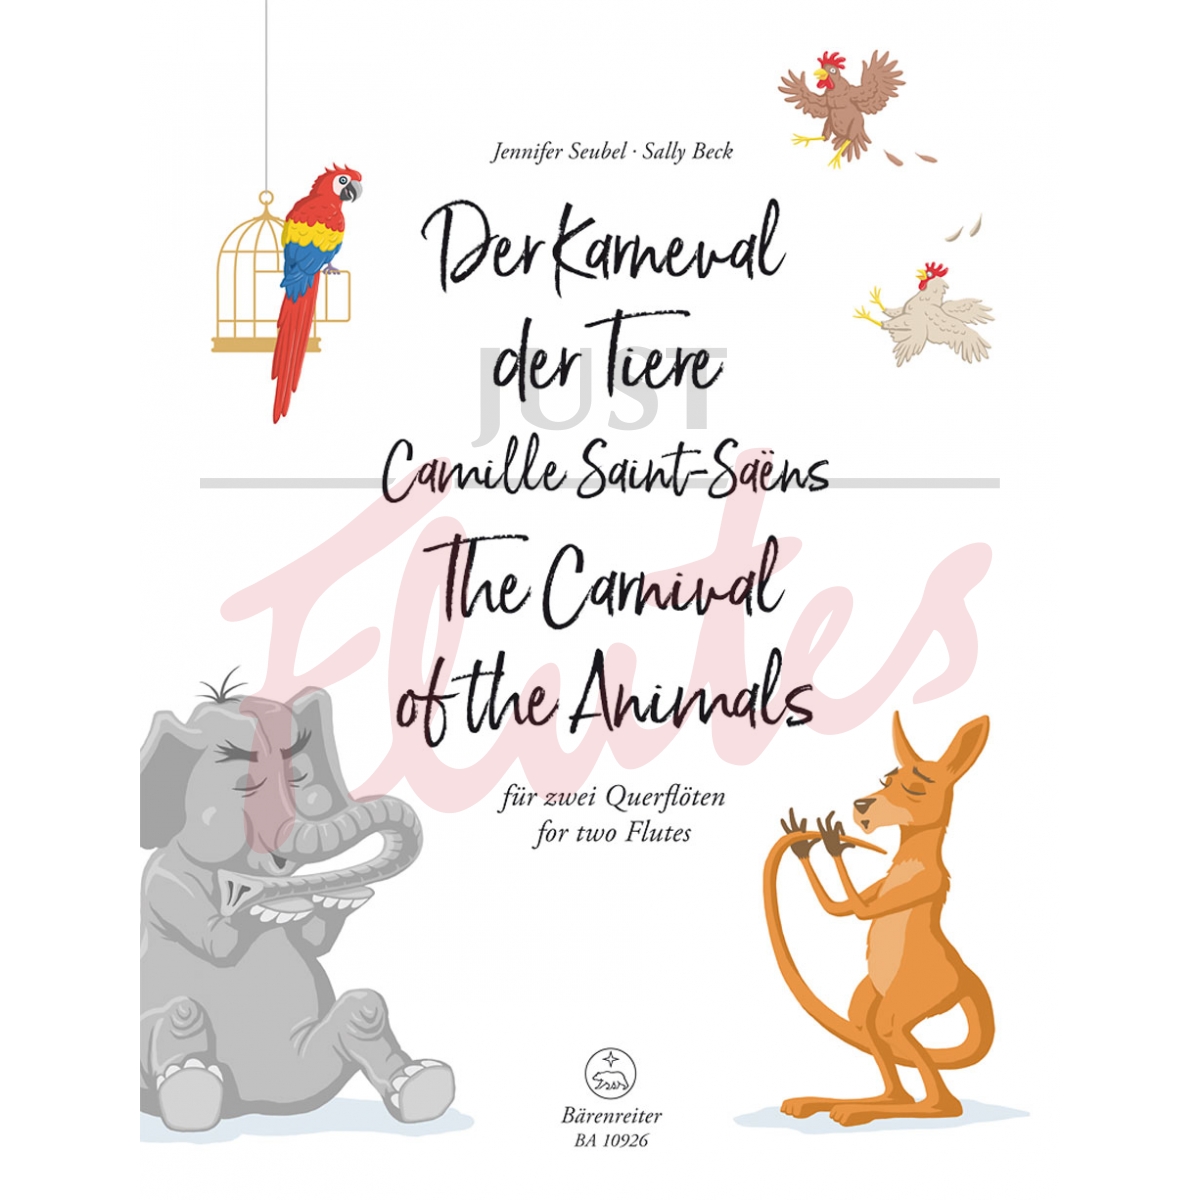 The Carnival of the Animals arranged for Two Flutes